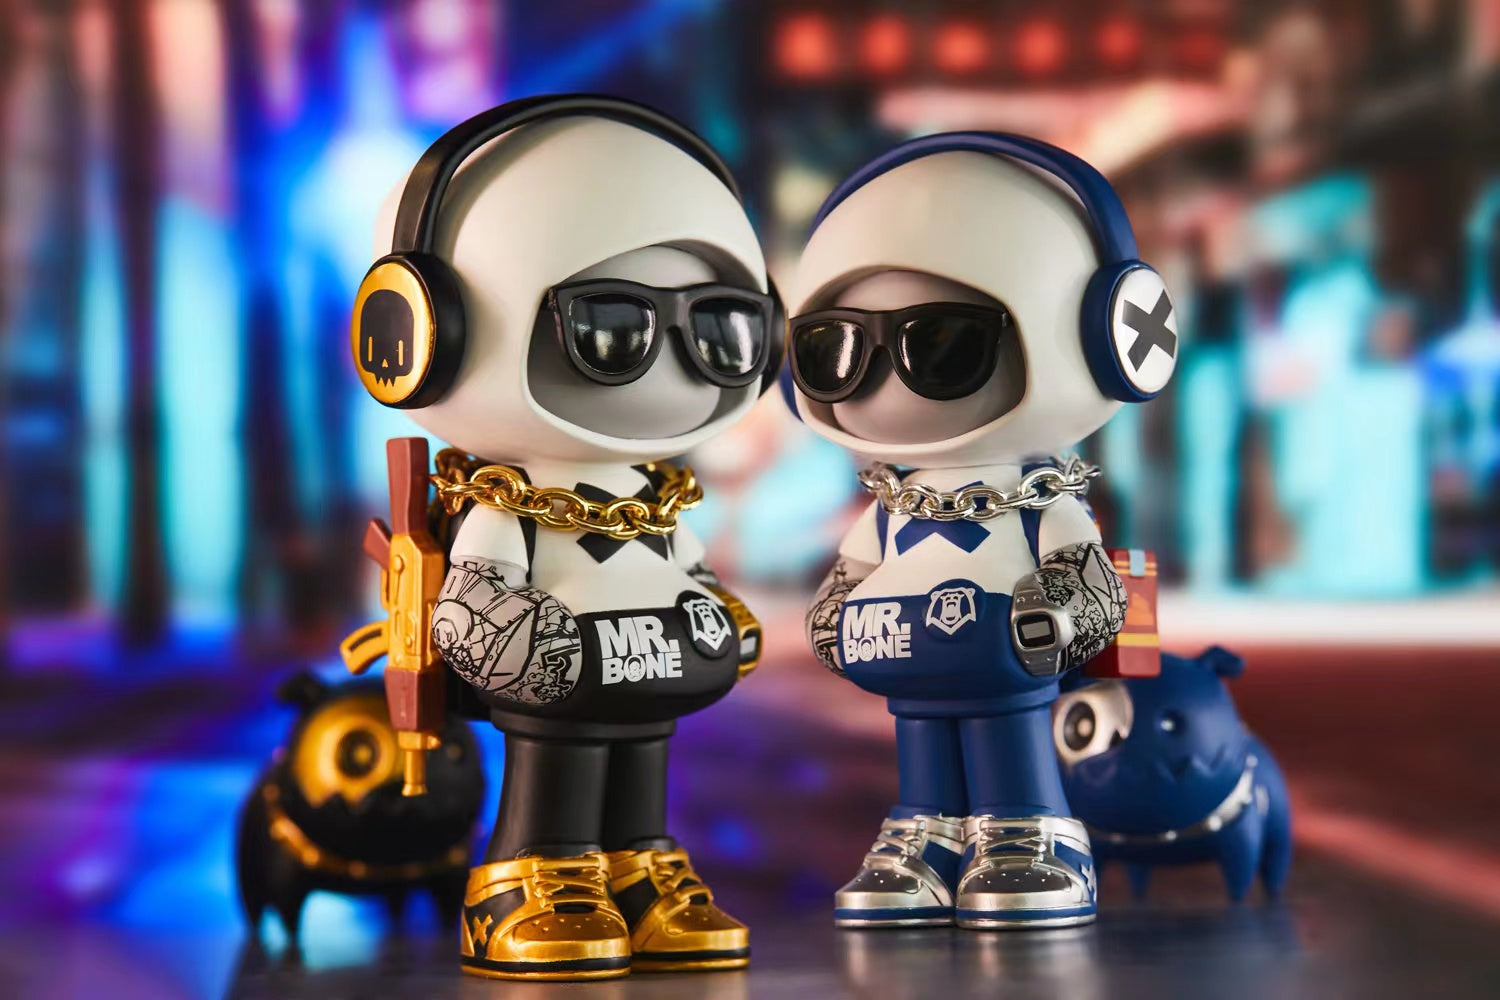 Mr Bone - The Bear toy figures with sunglasses, chain, gun, and robotic dog-Z.